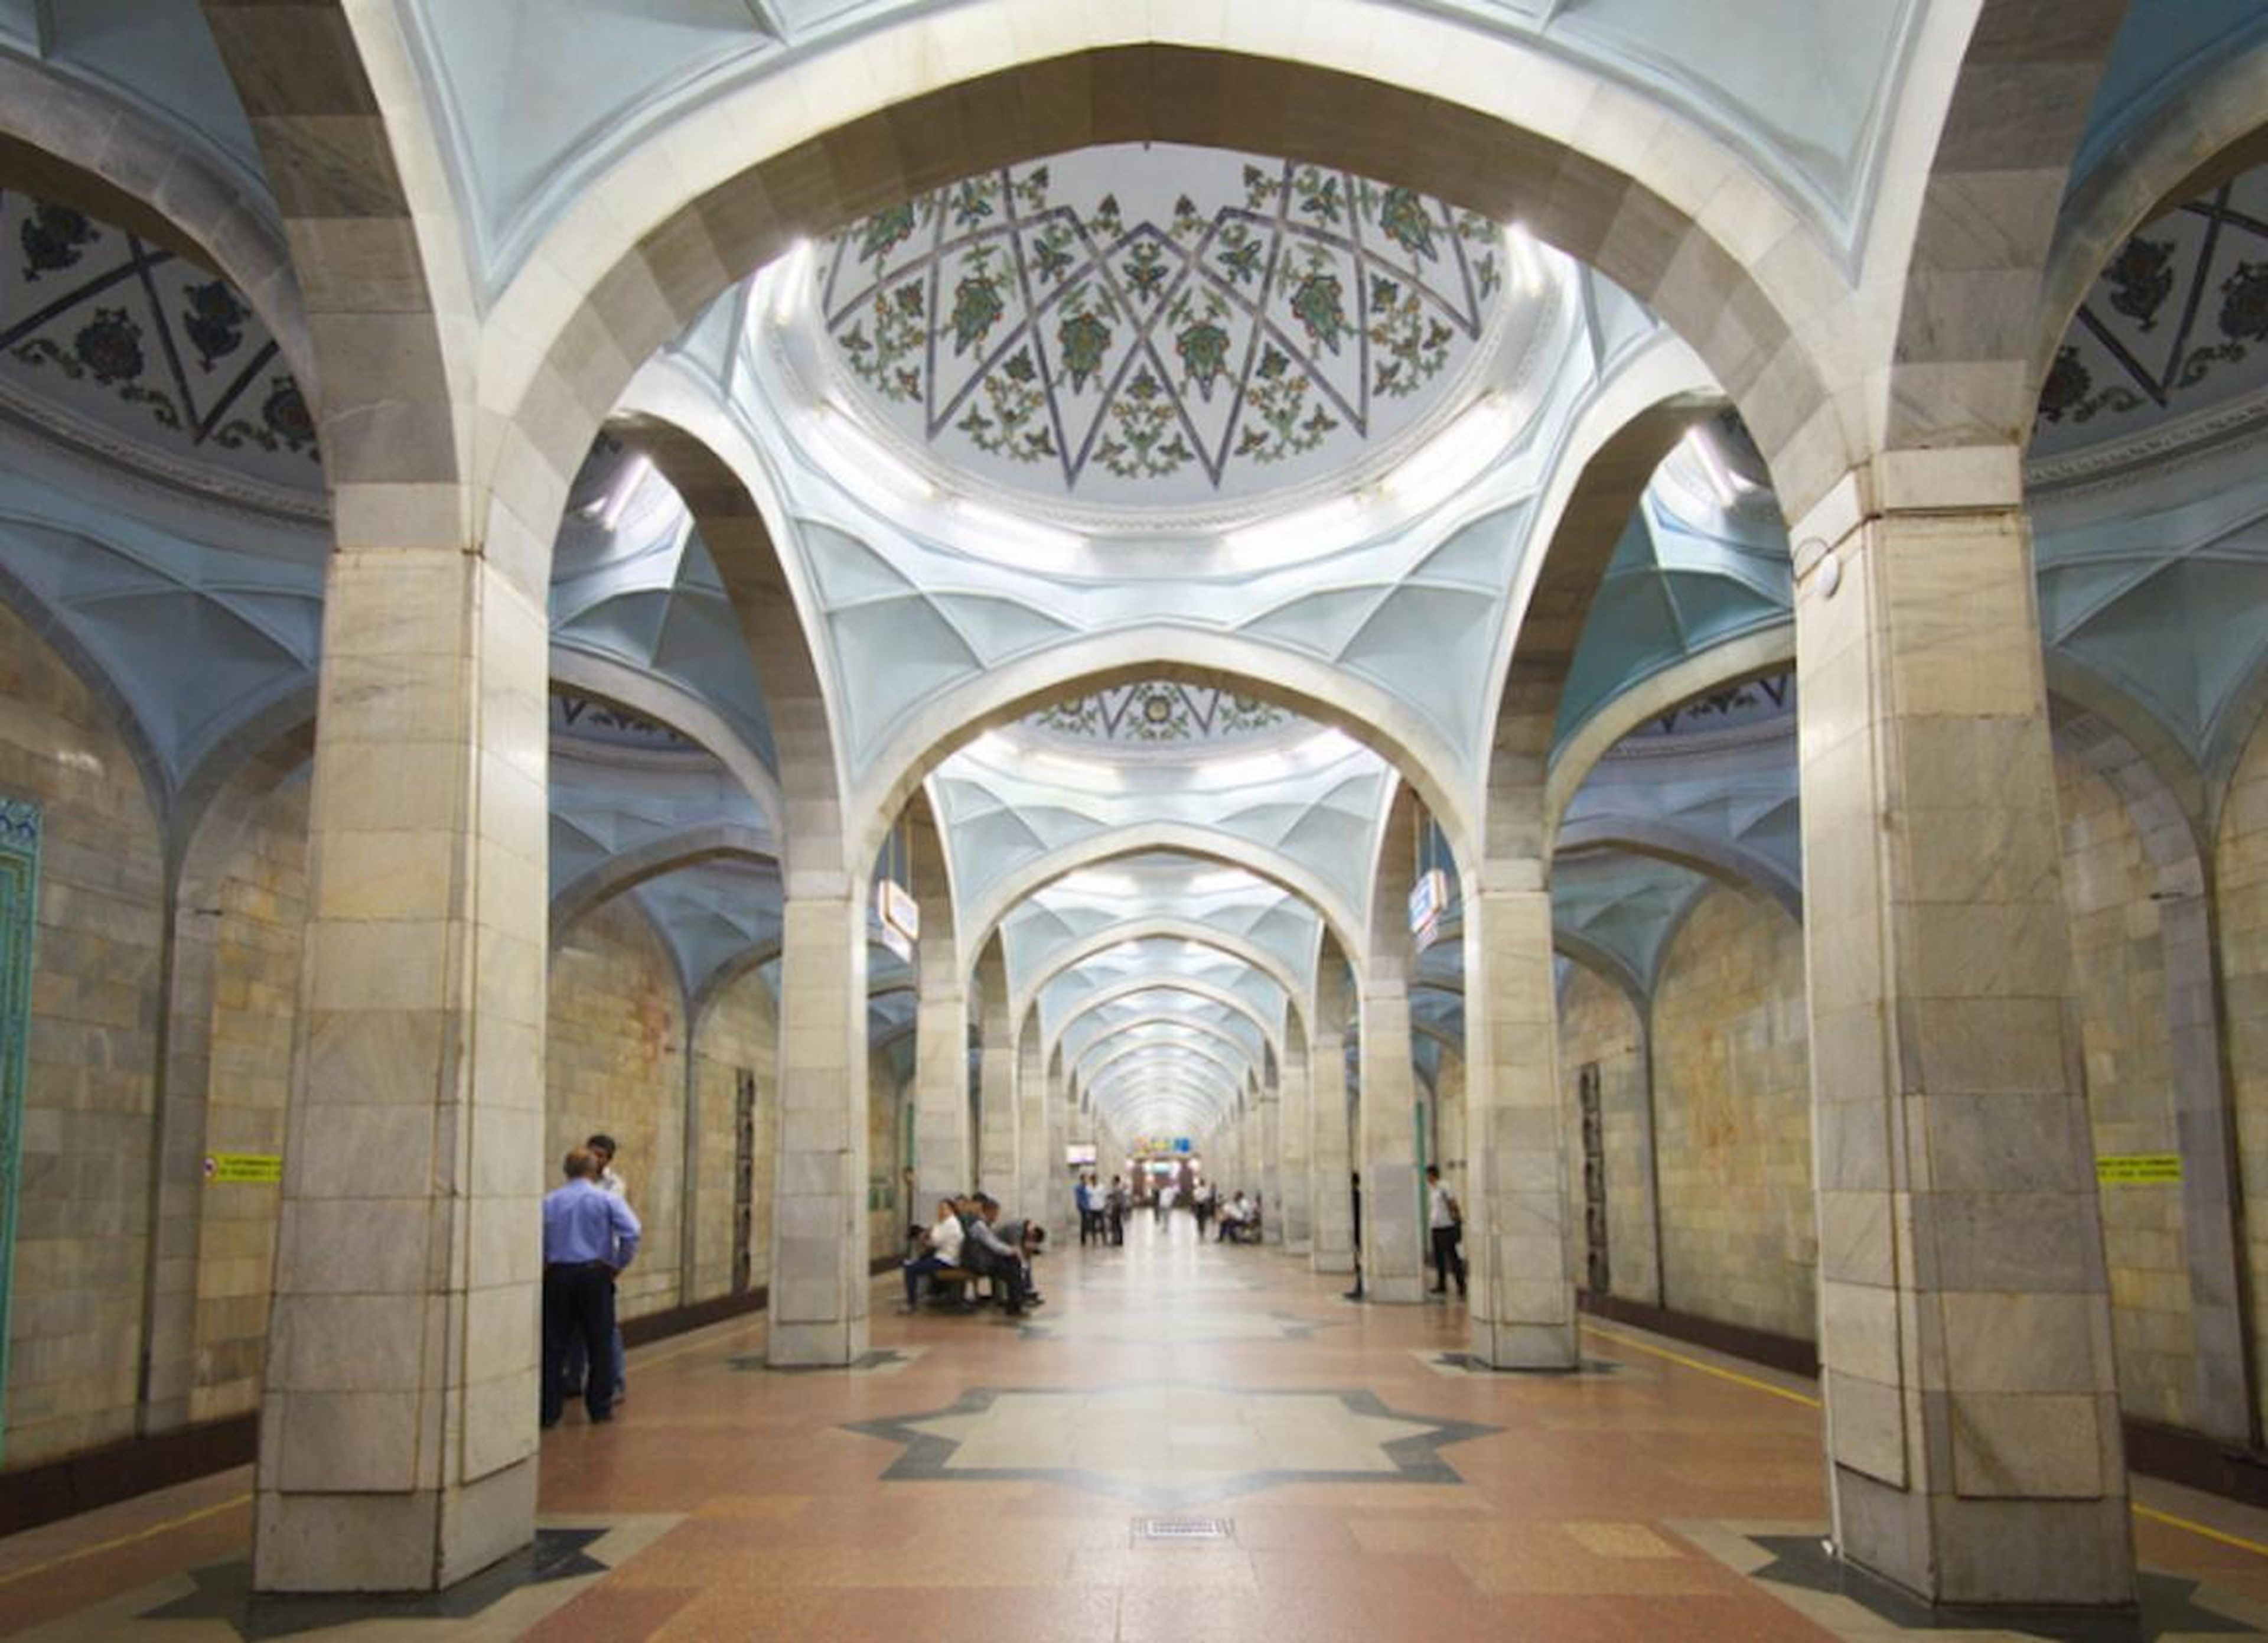 Some of the stations have geometric patterns, while others are in a more Soviet style. Many use marble, glass, granite, and ceramics to create their striking interiors.